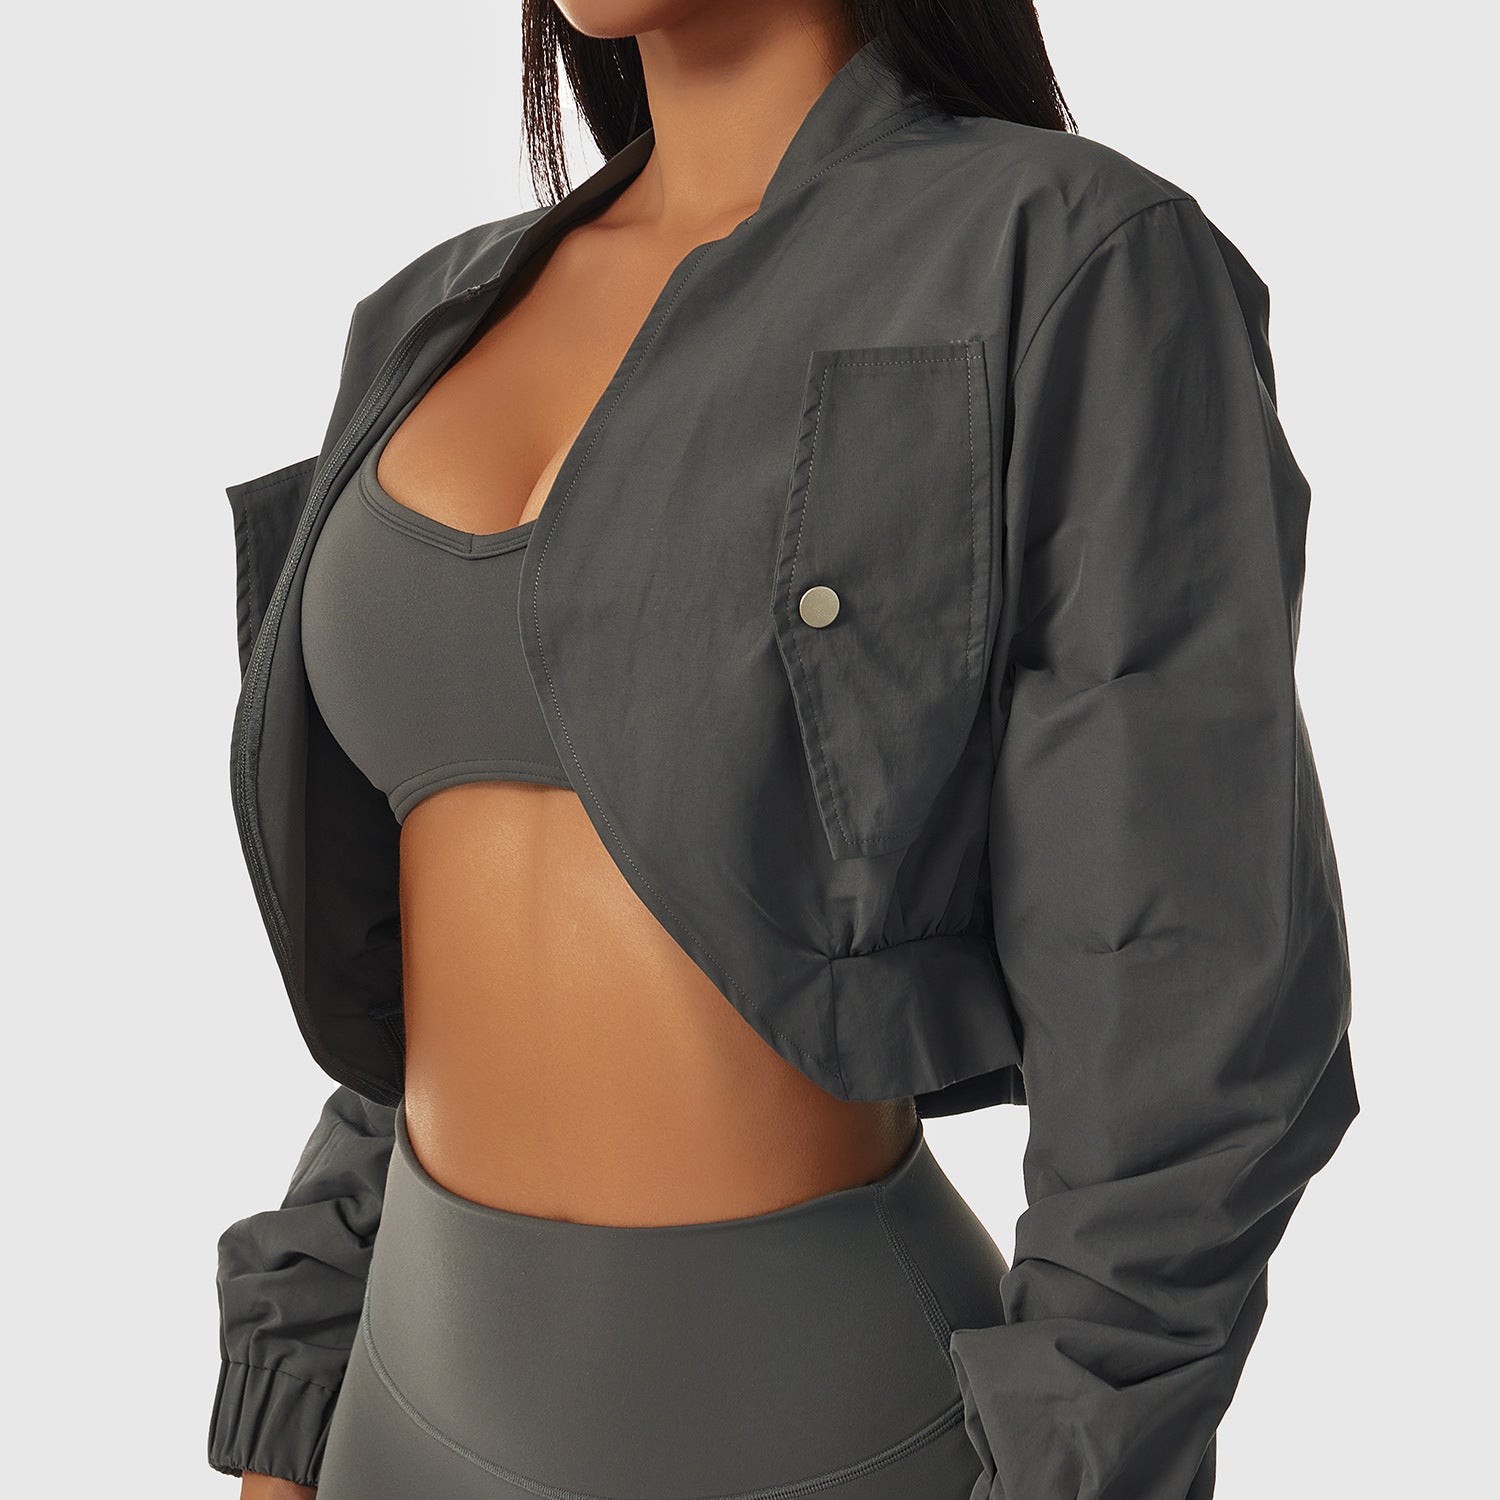 Long Sleeve Quick-Drying Sports Jacket Female Sun Protection Outside Shoulders Fitness Wear Standing Collar Casual Jacket Tight Yoga Tops